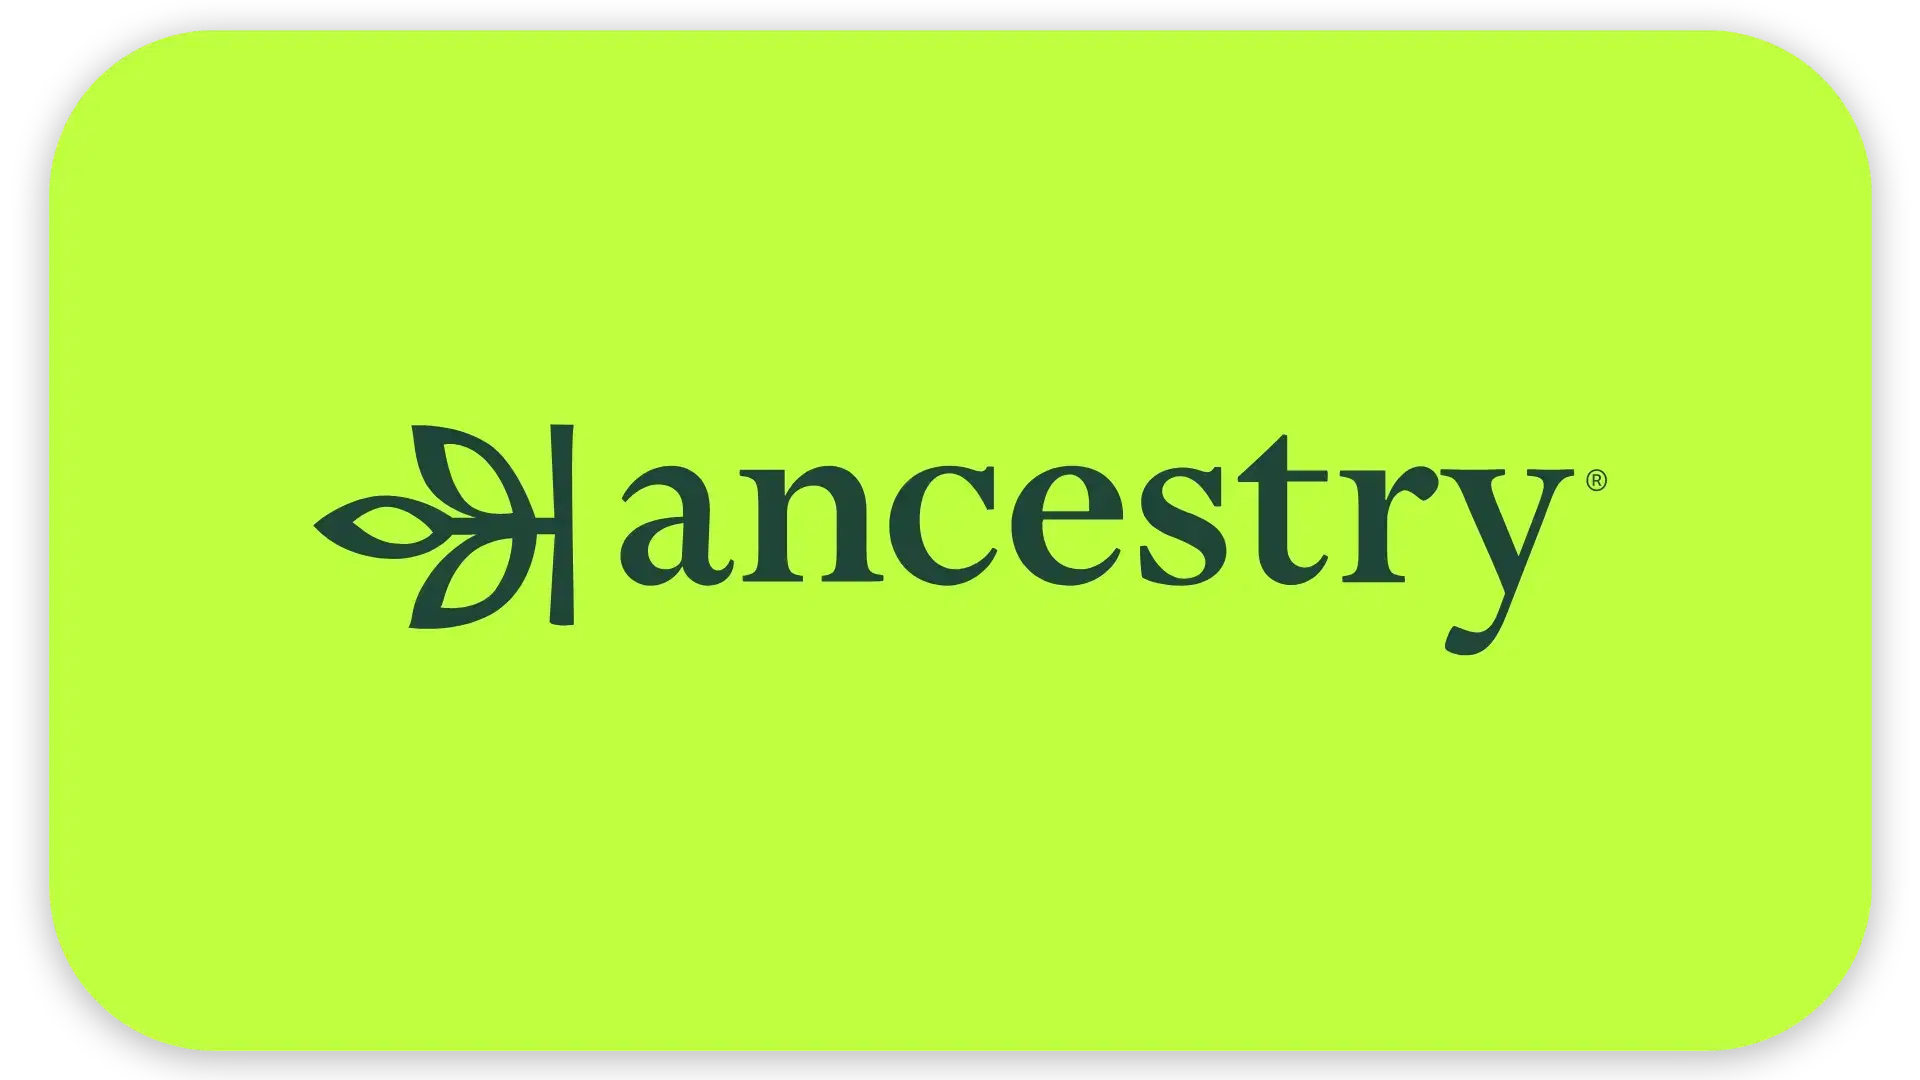 The photo shows the Ancestry logo with the word "ancestry" and a leaf design on a bright green background.